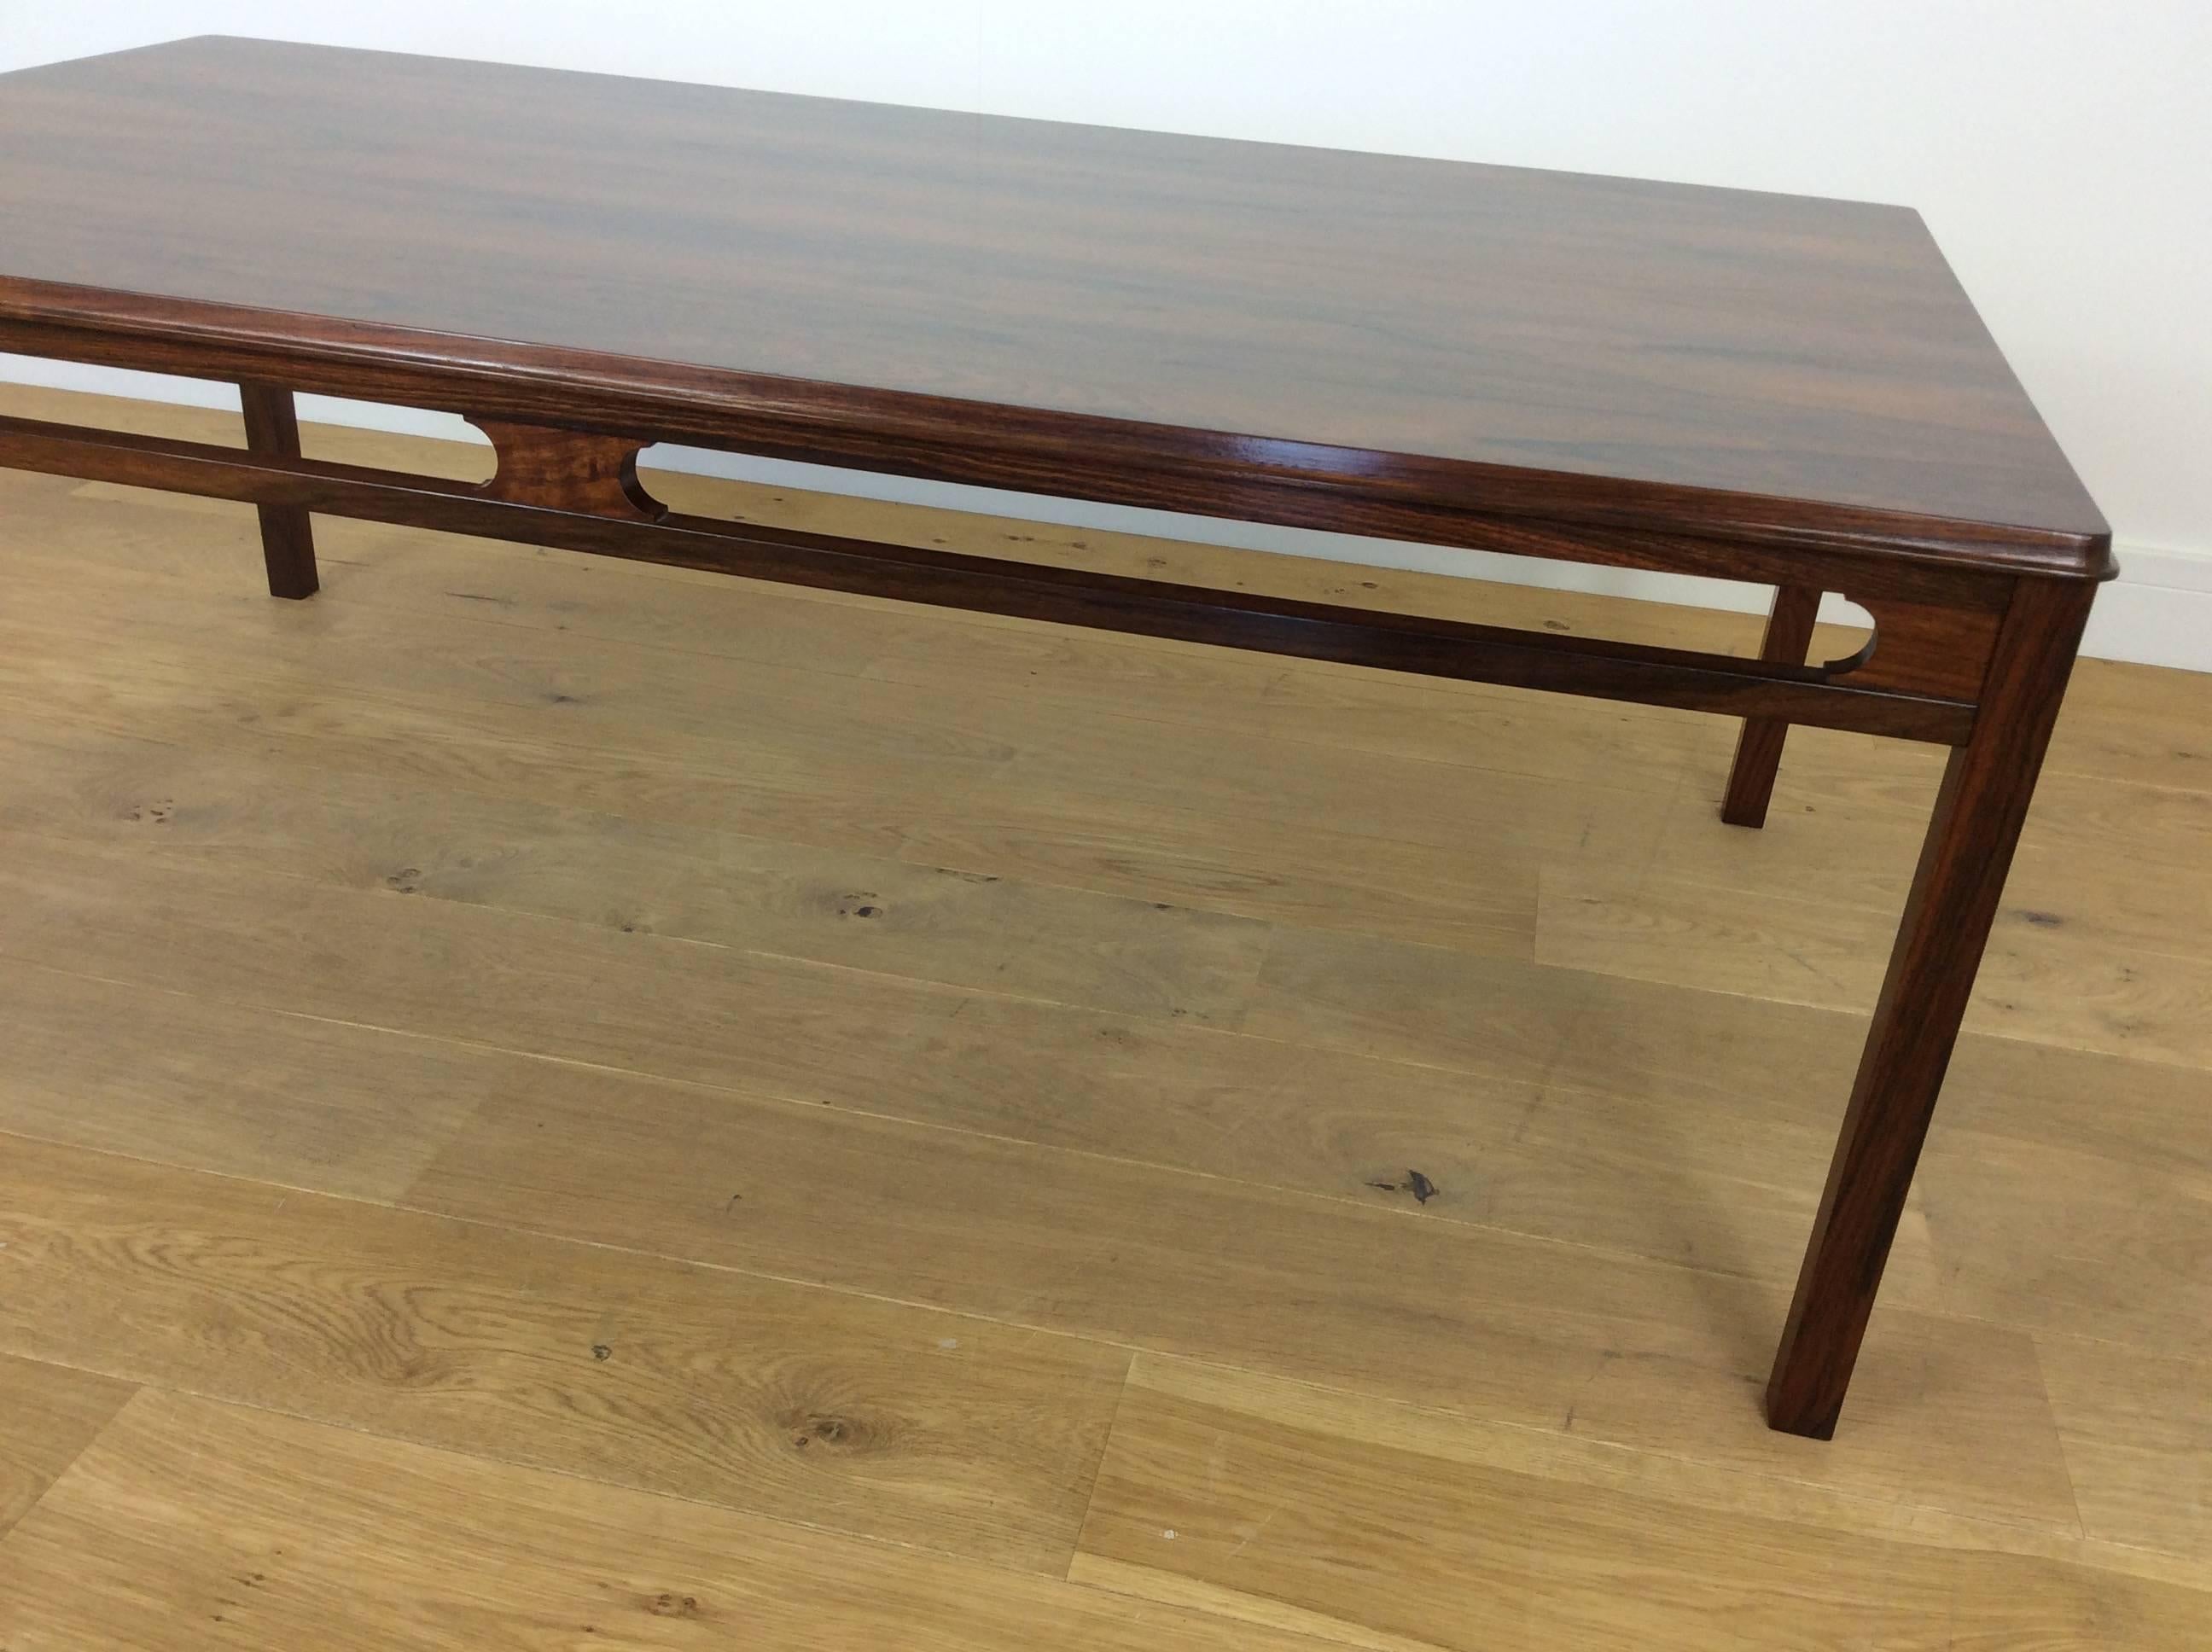 Arne Halvorsen rosewood table
Mid-Century rosewood occasional table, centre table.
Beautifully designed low rosewood centre table.
Designed by Arne Halvorsen, Produced by renowned cabinet makers Ramus Solberg
Measures: 52 cm H, 146 cm W, 81 cm